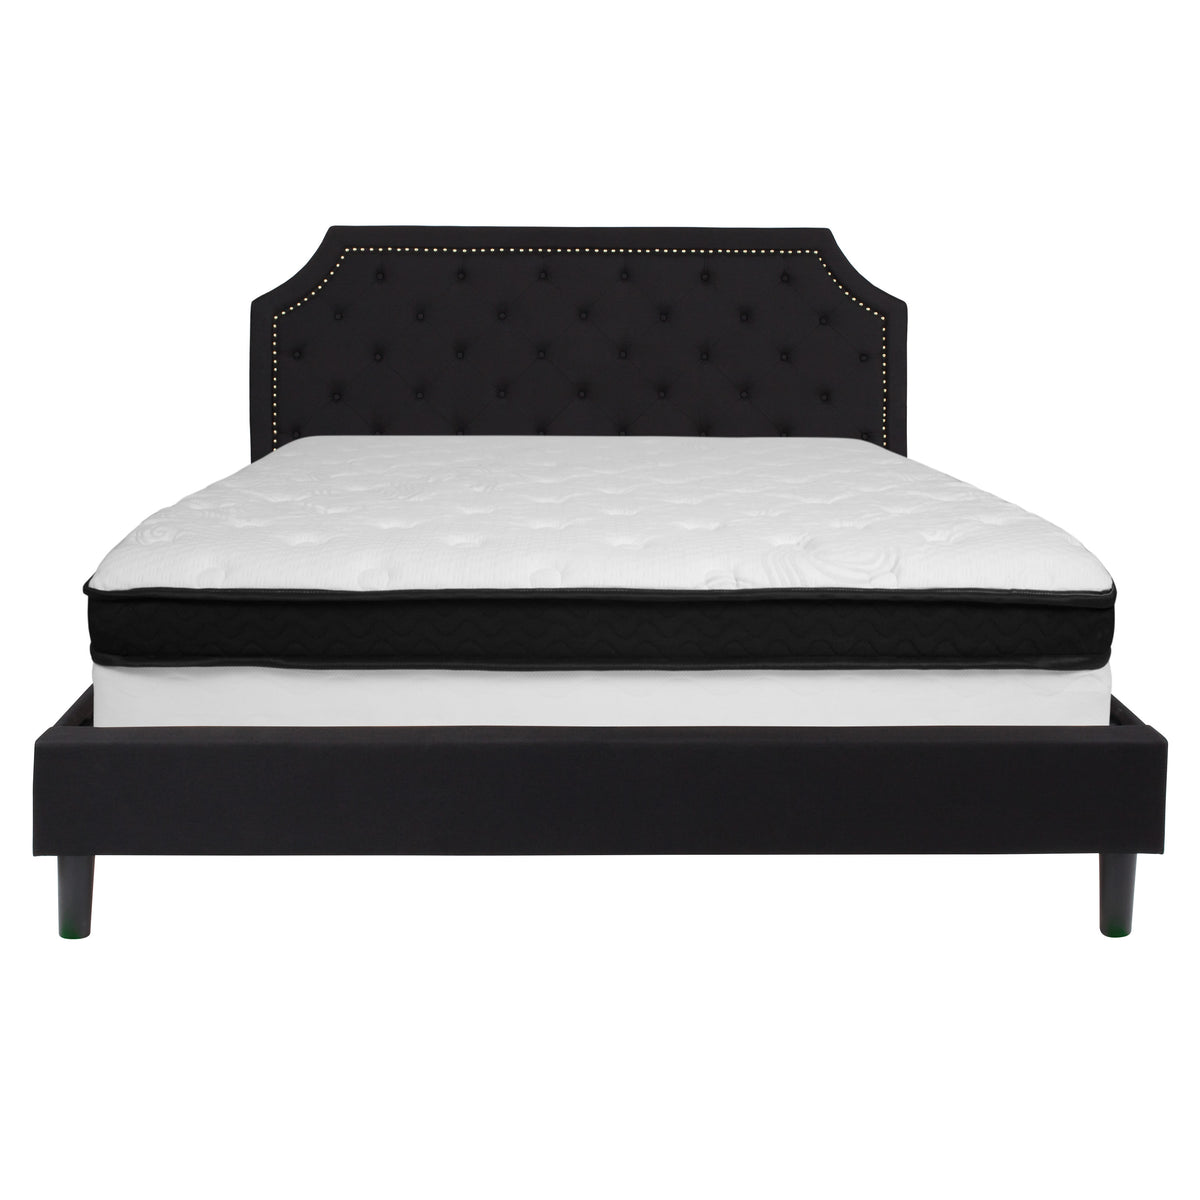 Black,King |#| King Size Arched Tufted Black Fabric Platform Bed with Memory Foam Mattress